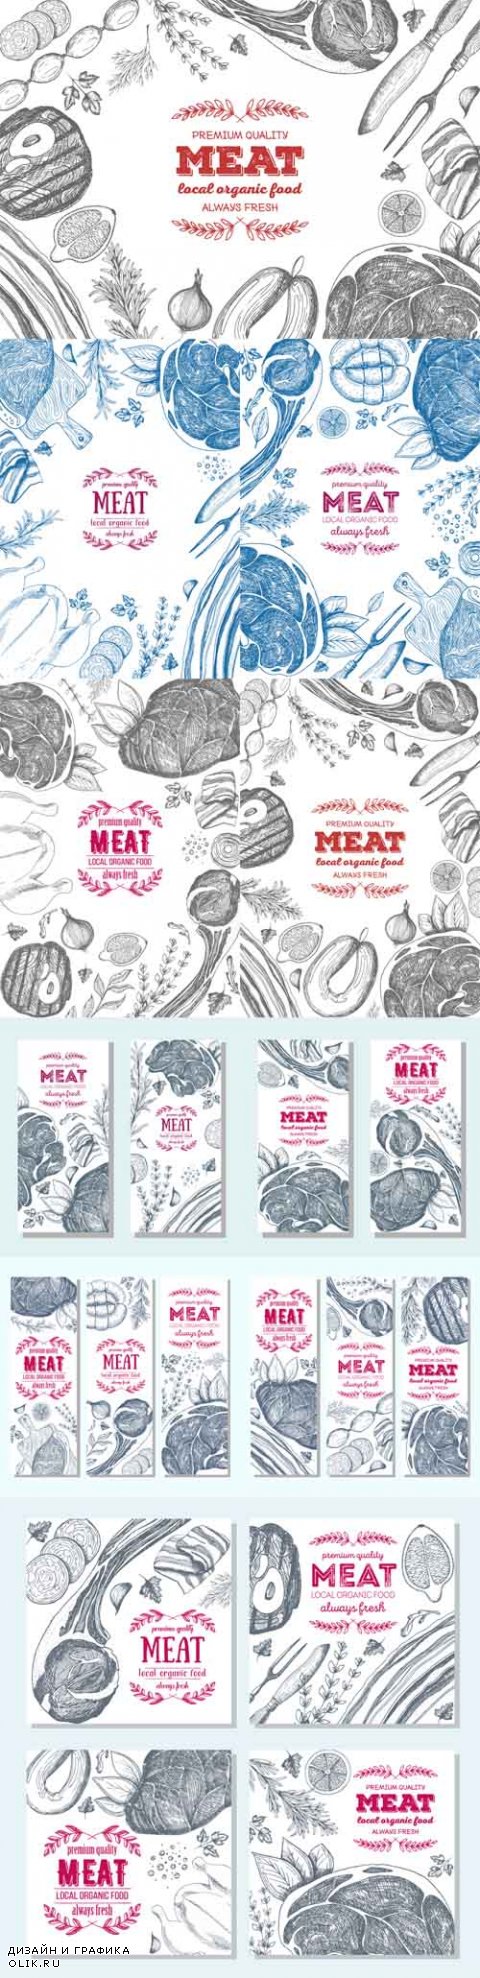 Vector Meat Banners and Frames. Linear Graphic. Vintage Illustrations